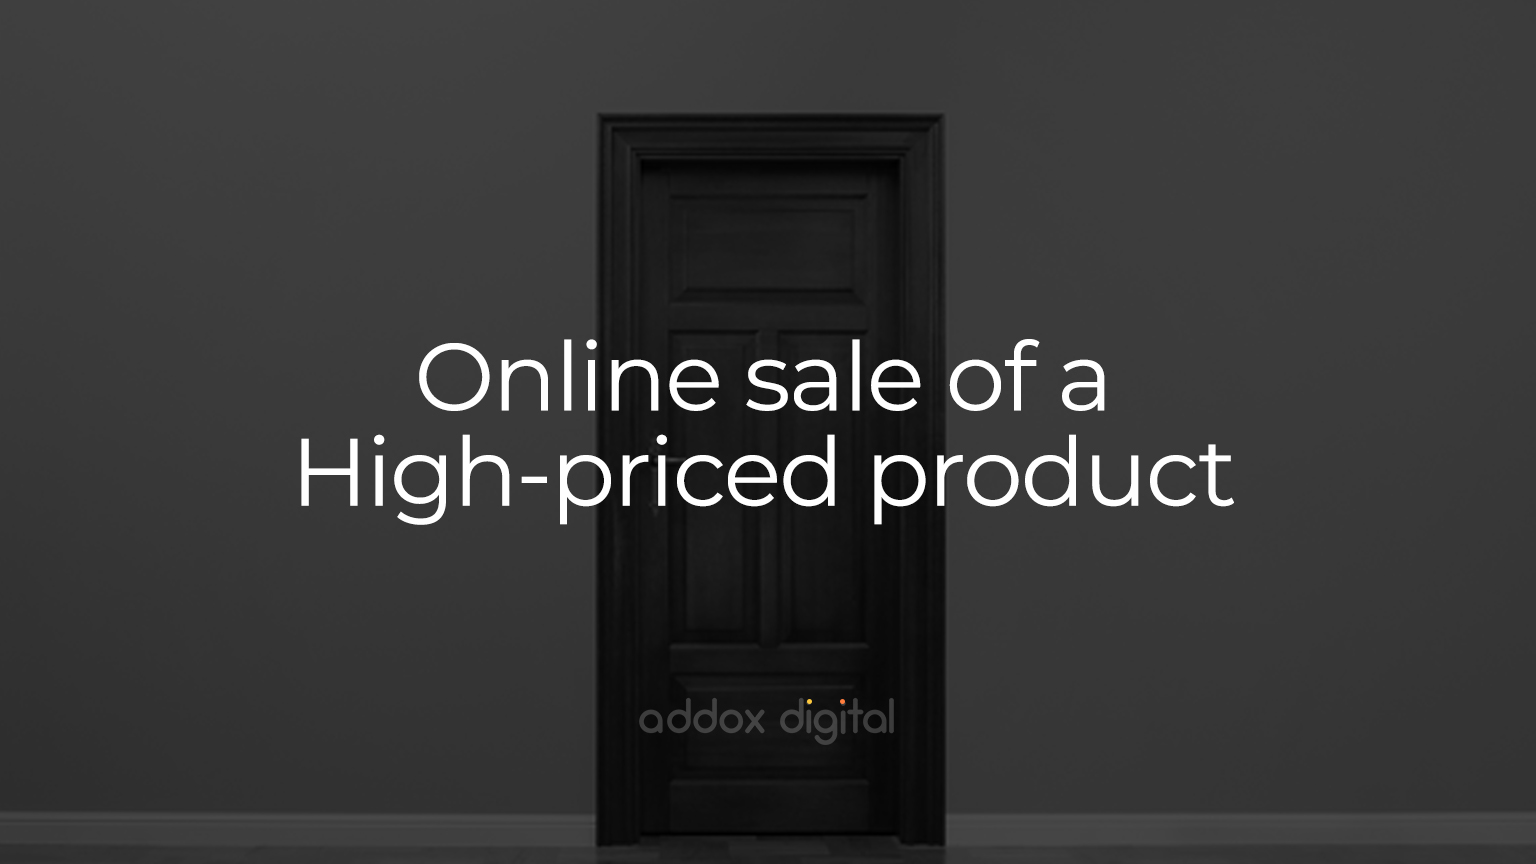 Online sale of a High-priced product